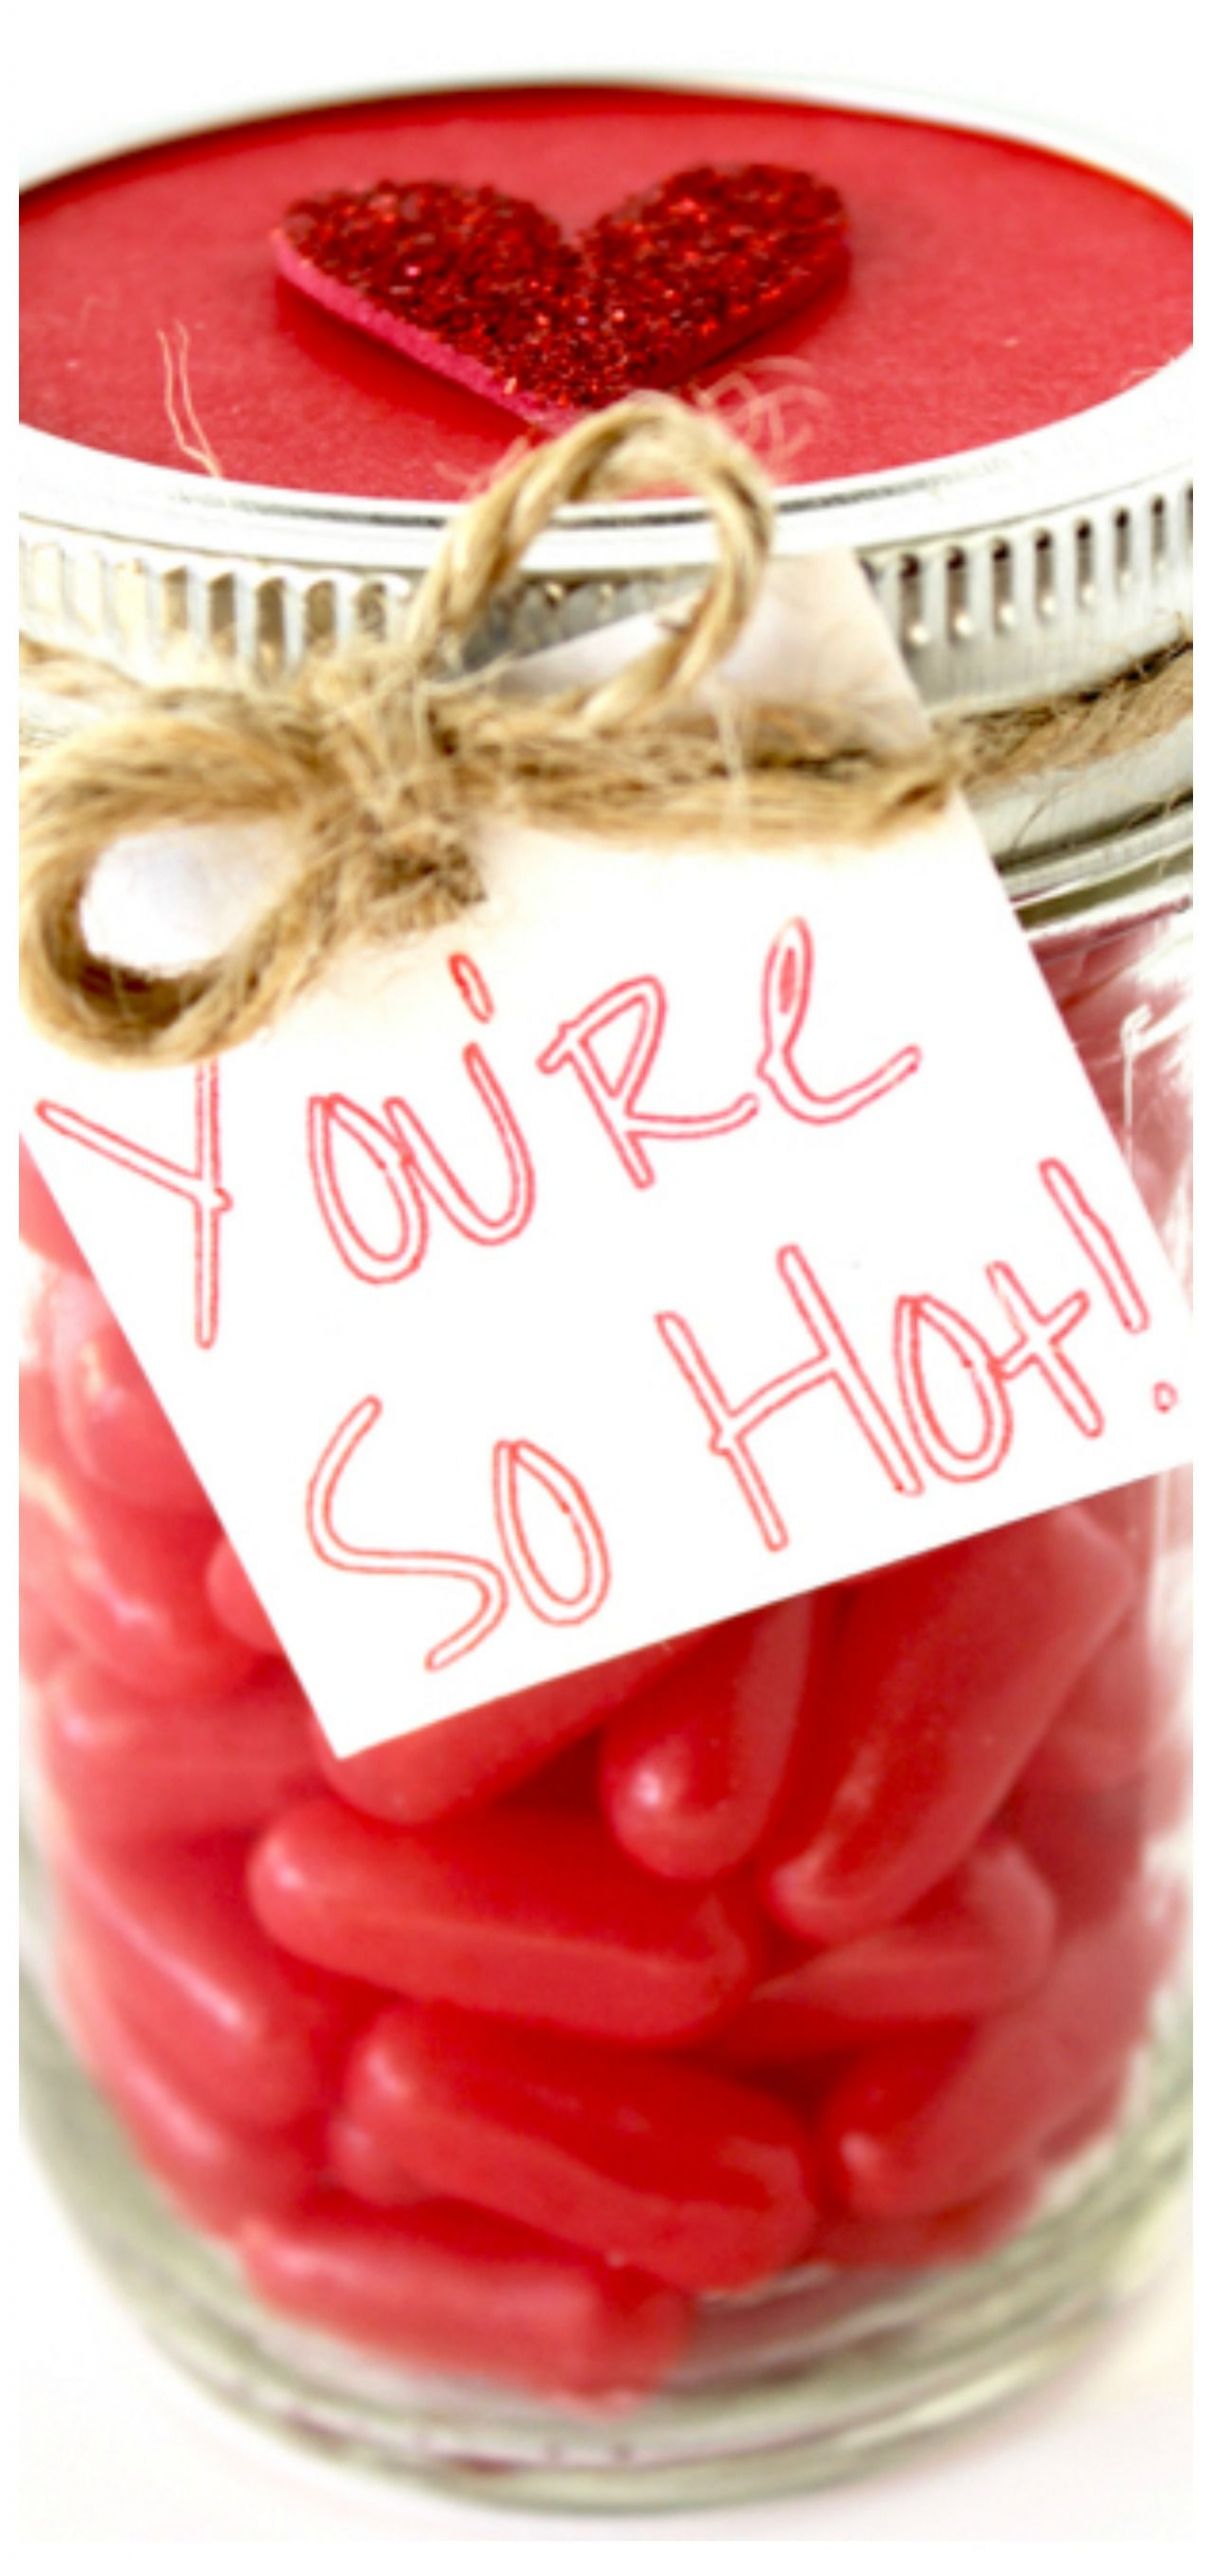 Sexy Valentines Gift Ideas
 Red Hots Valentine’s Candy Gift in a Jar Let your man